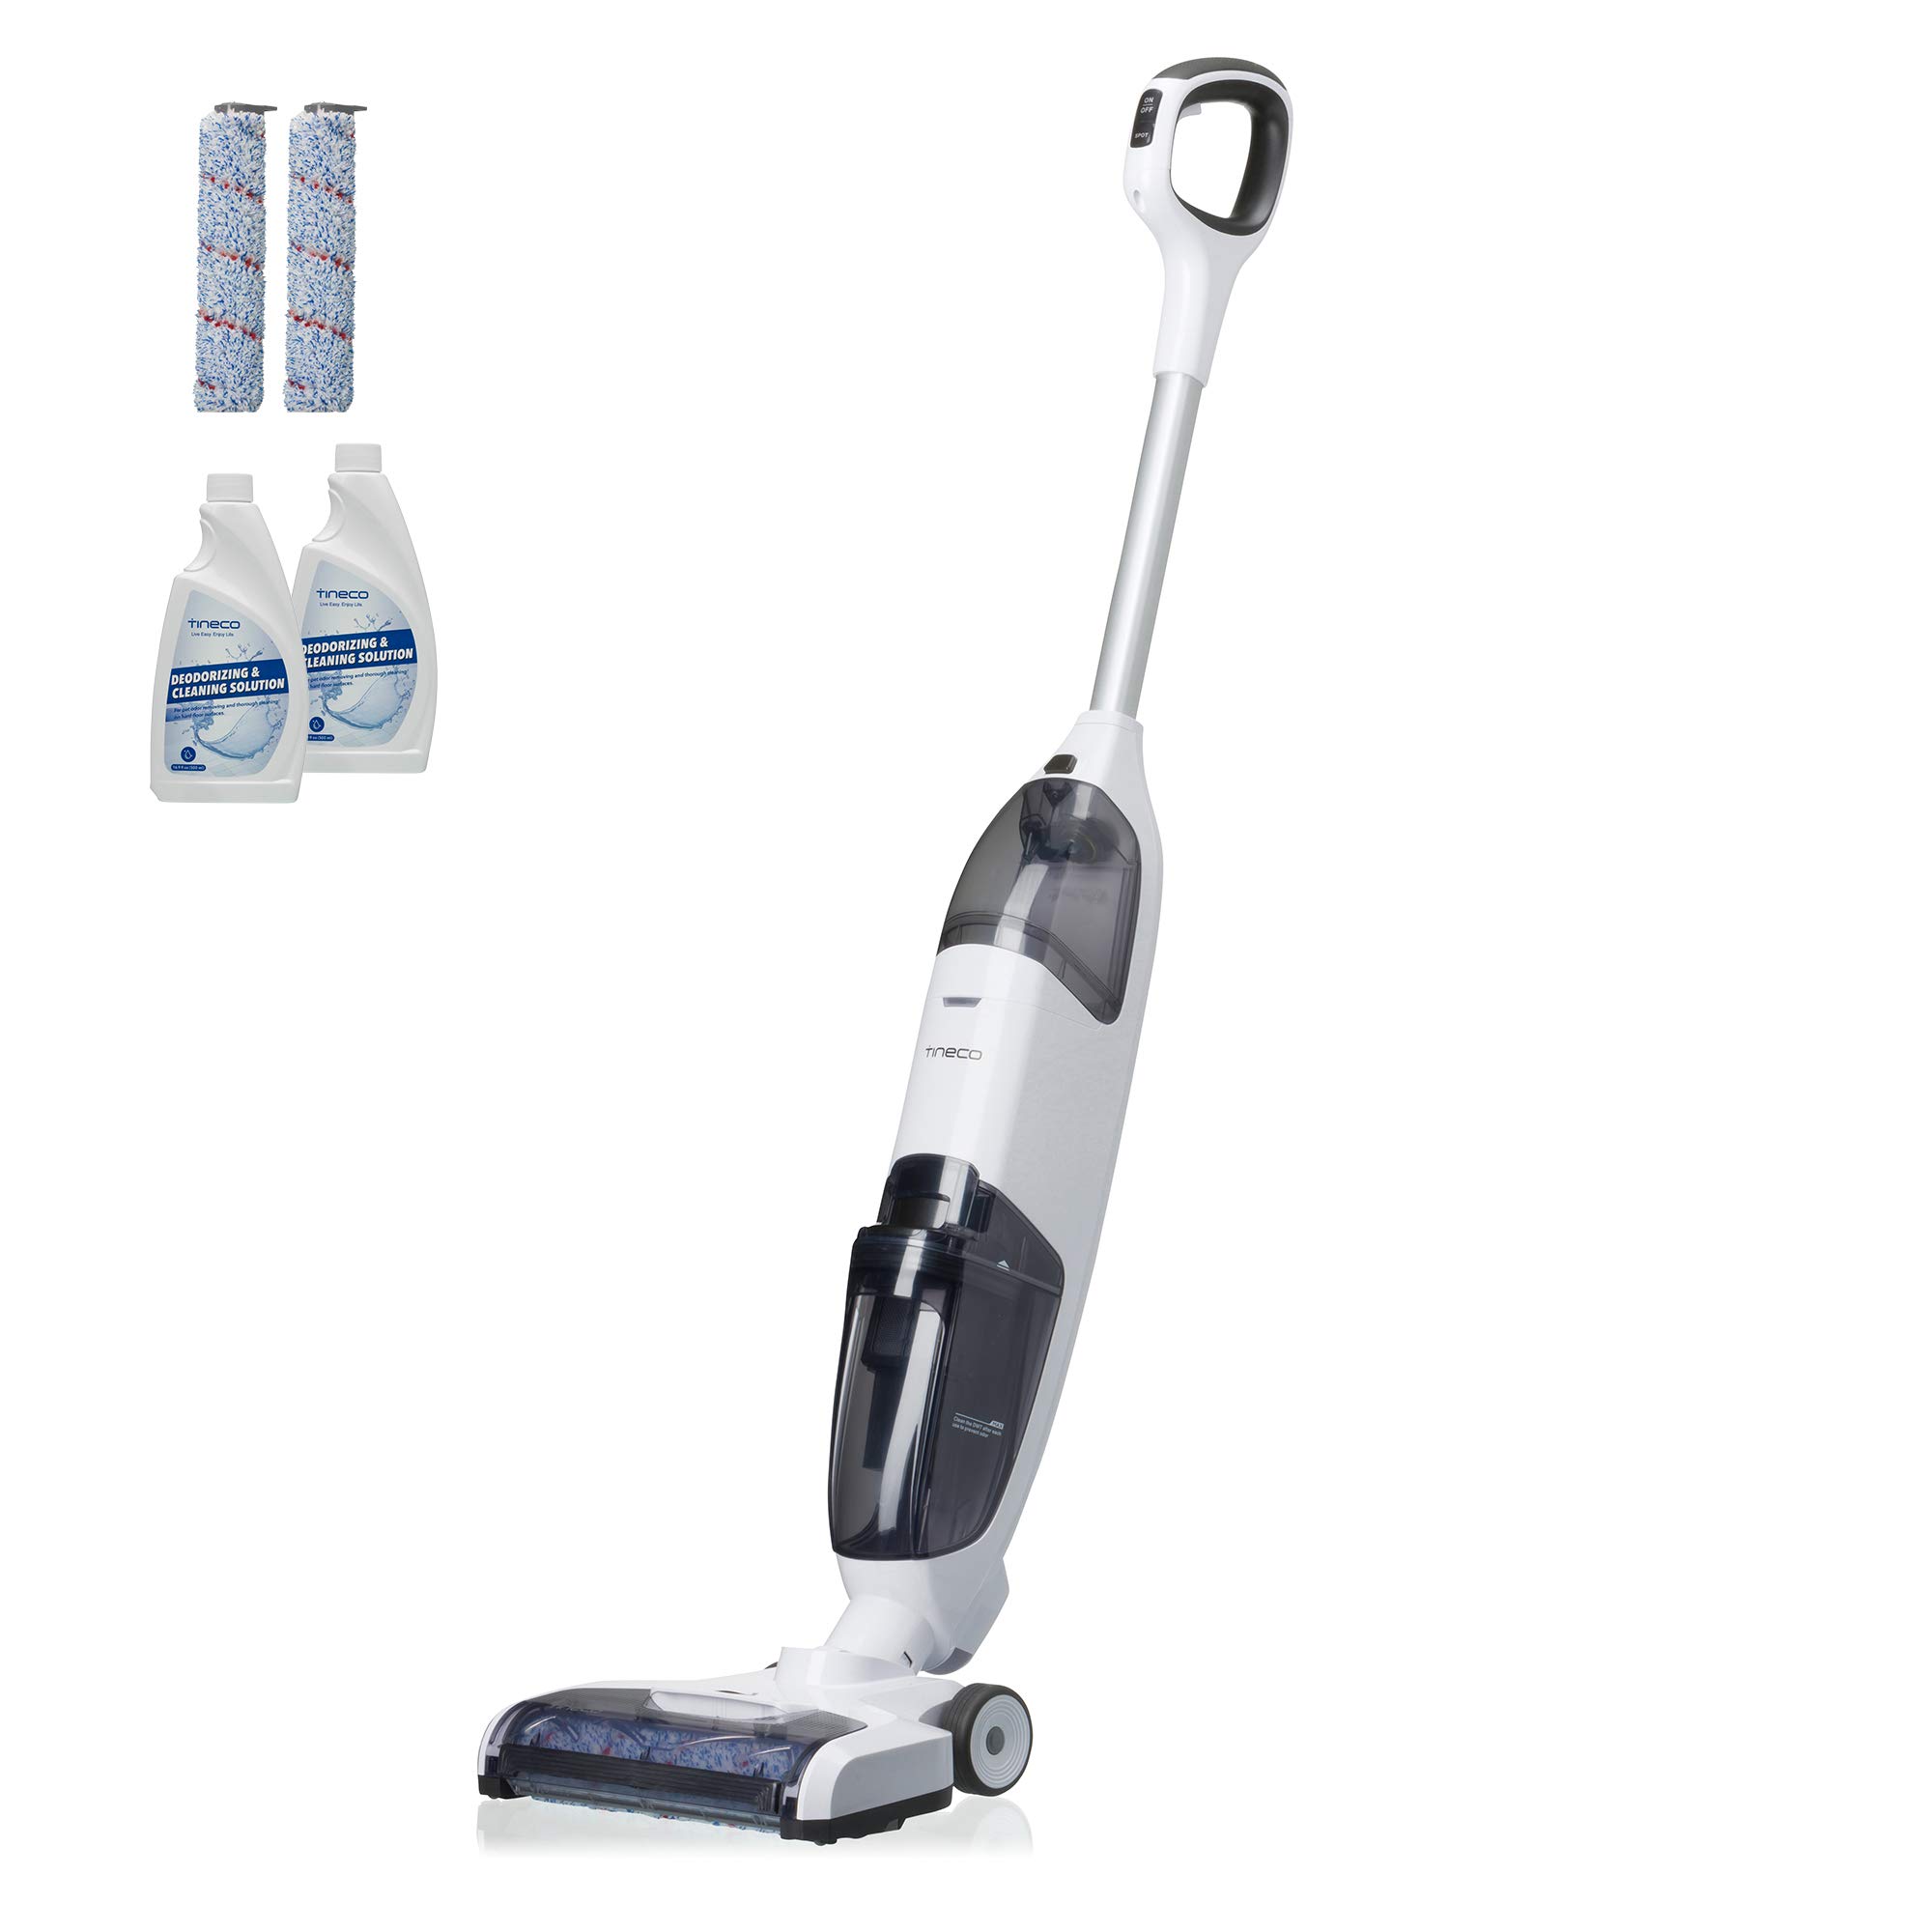 Tineco iFloor Complete Cordless Wet Dry Vacuum Hardwood Floor Cleaner for Multi-Surface Cleaning , Great for Sticky Messes and Pet Hair 